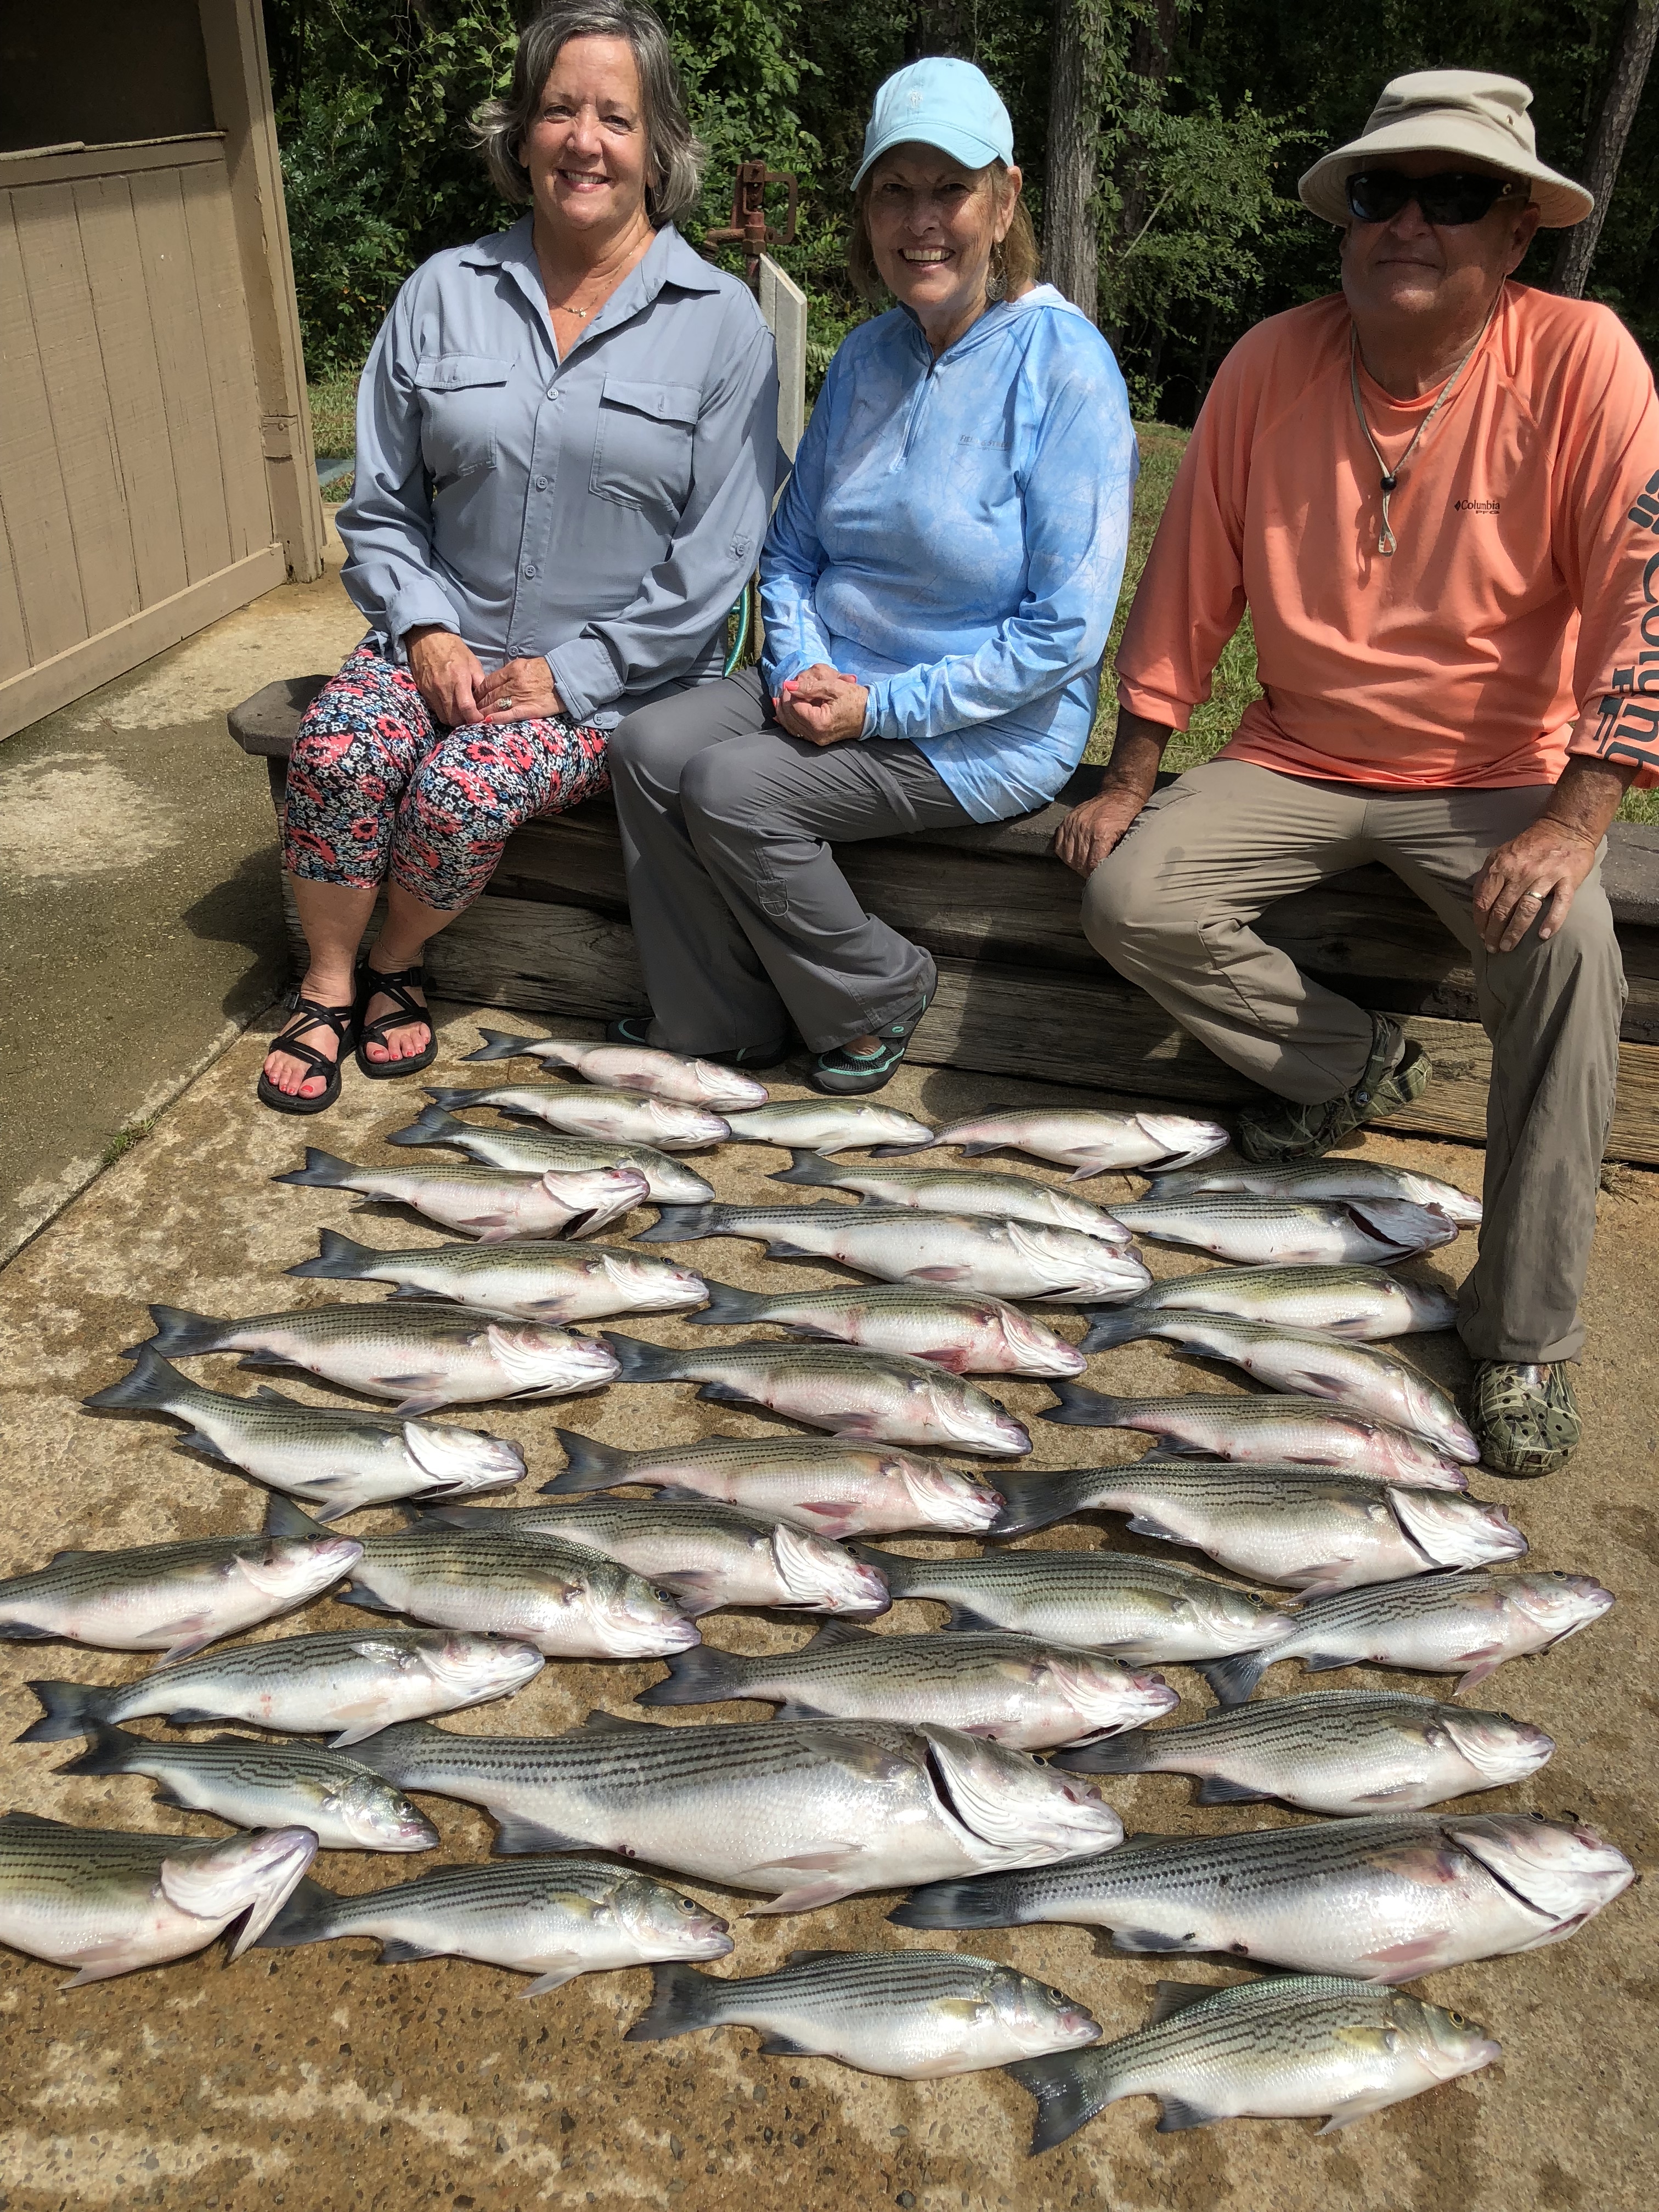 August 10, 2018 Debbie Fletcher, Juanita and Ricky Cleghorn with their nice catch. IMG_2297